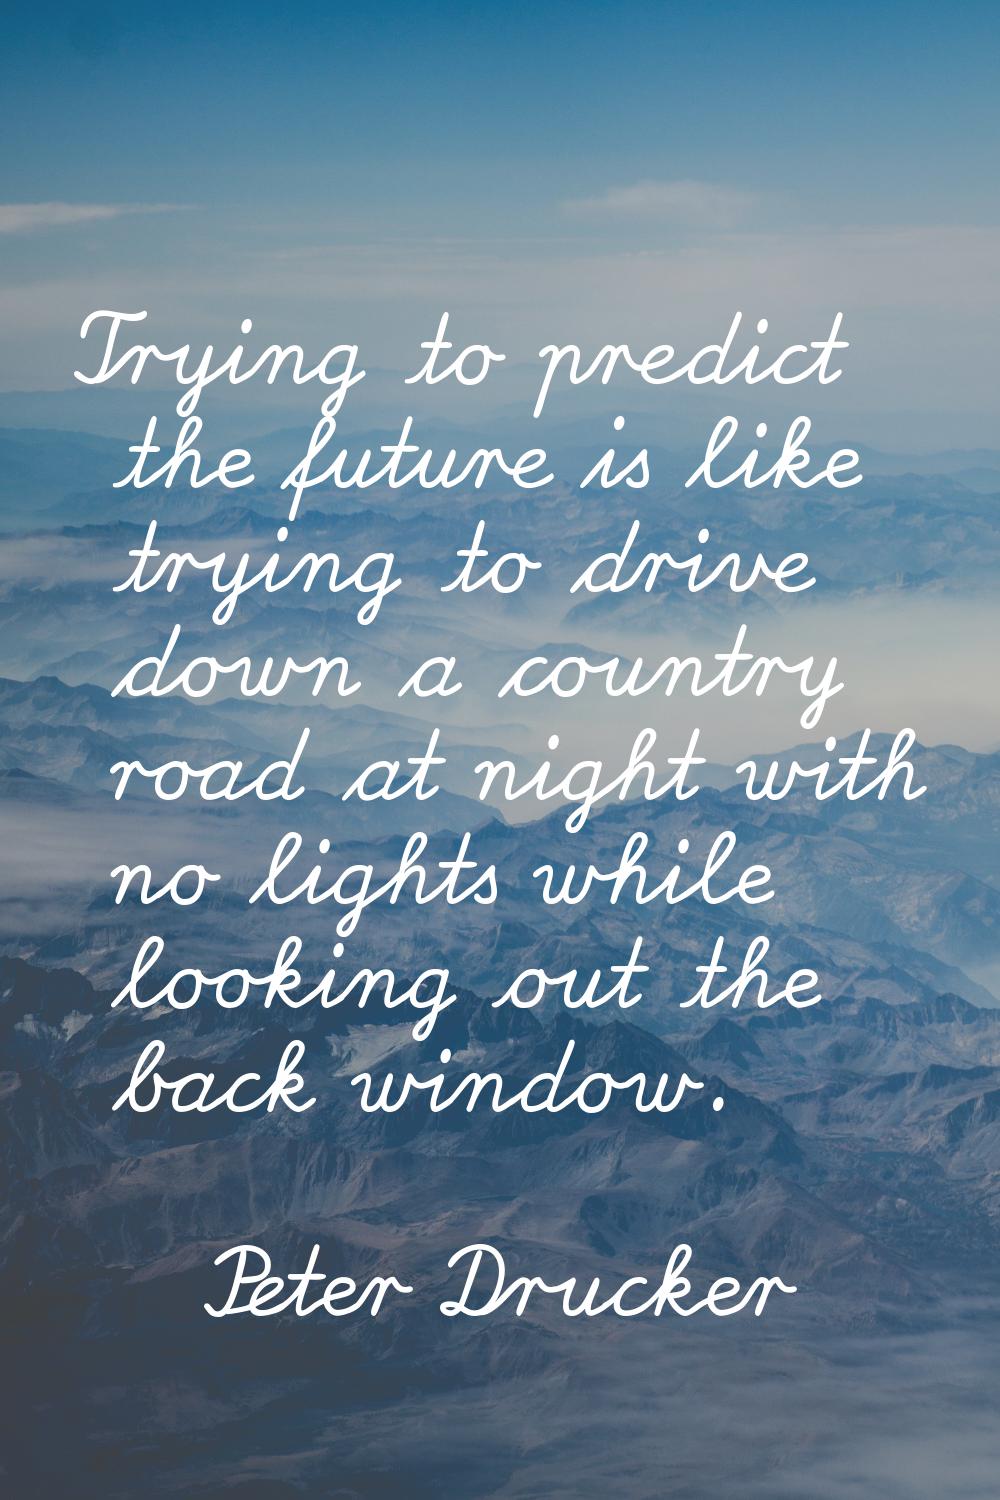 Trying to predict the future is like trying to drive down a country road at night with no lights wh